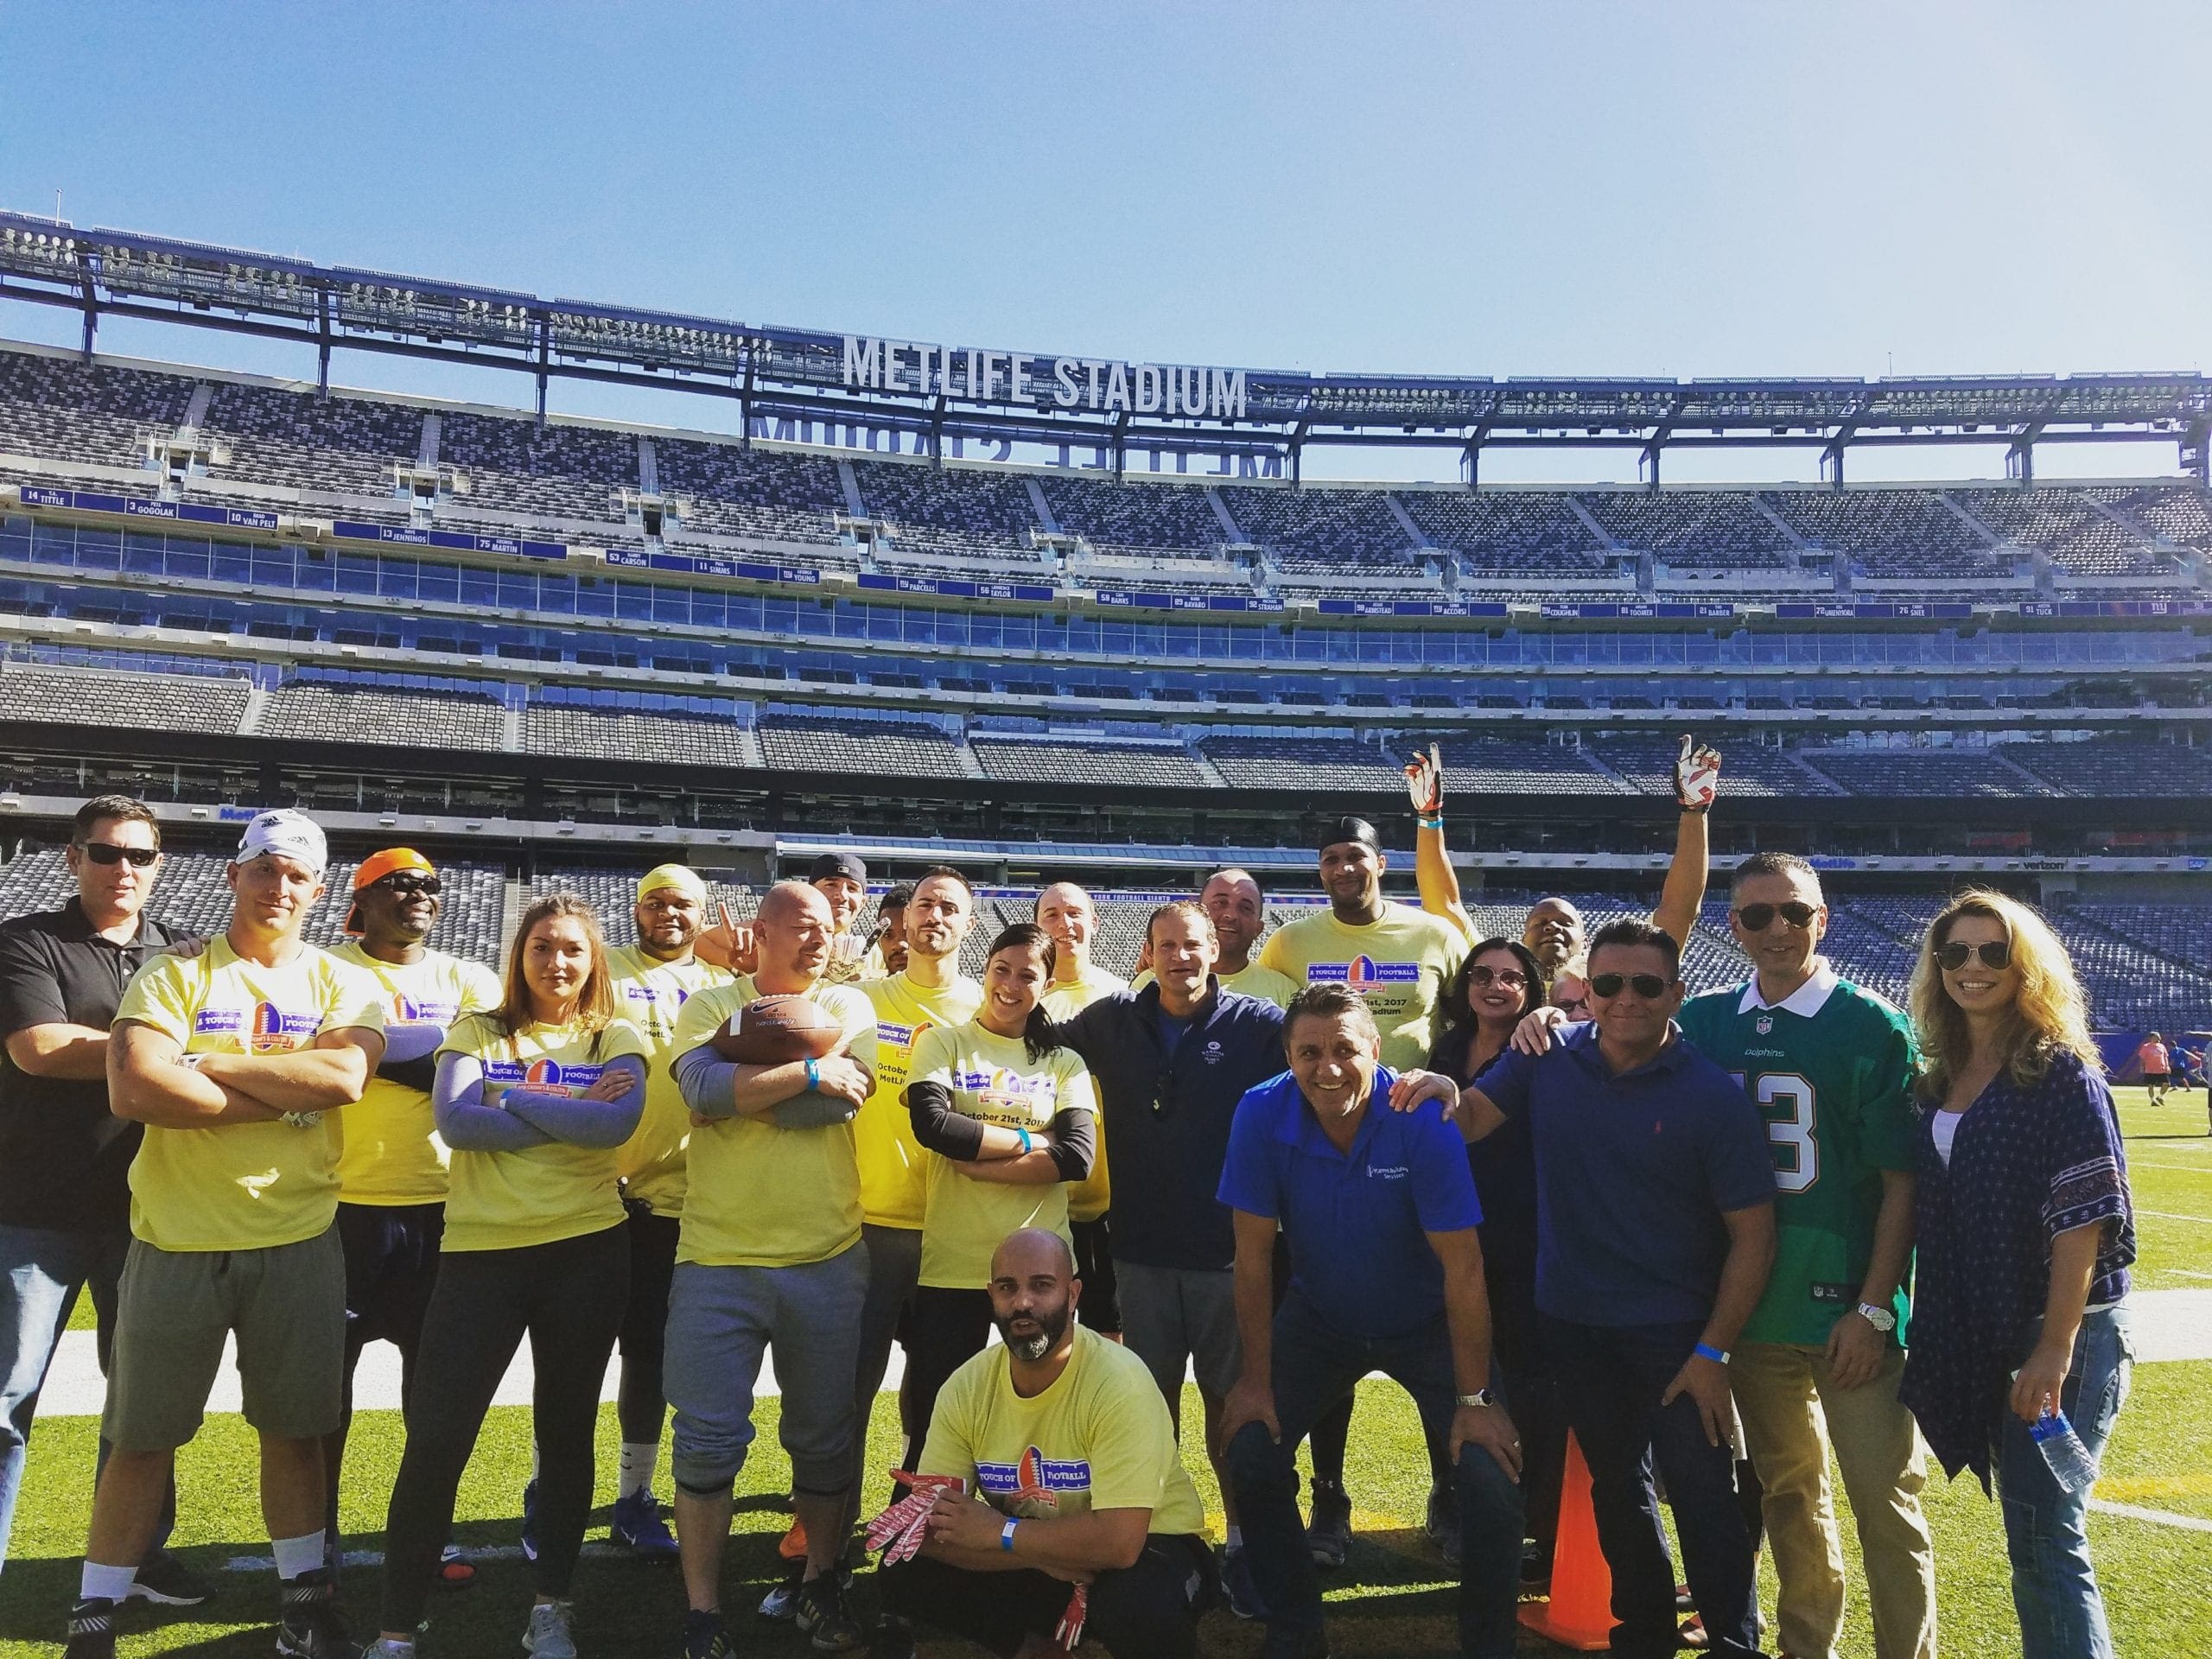 Planned employees at a charity event at Giants Stadium